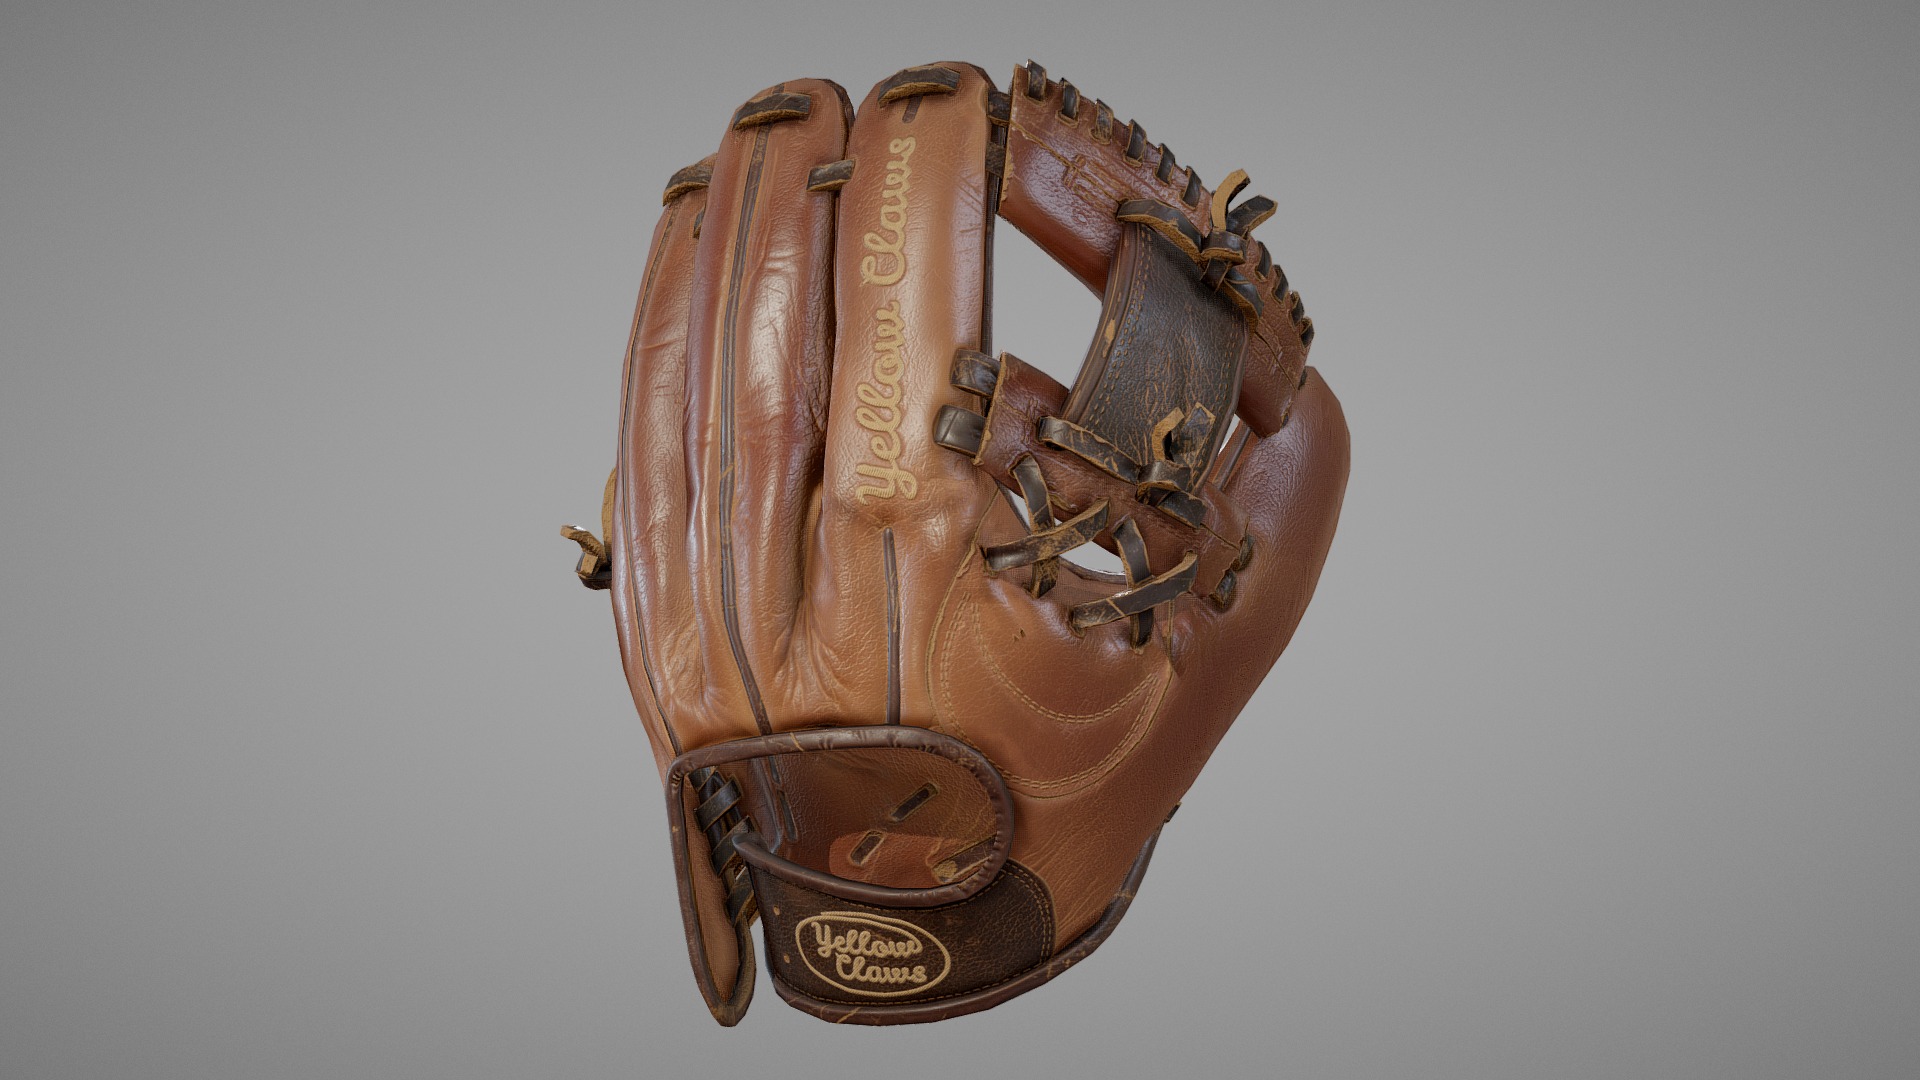 3D model Baseball Glove - This is a 3D model of the Baseball Glove. The 3D model is about a brown leather glove.